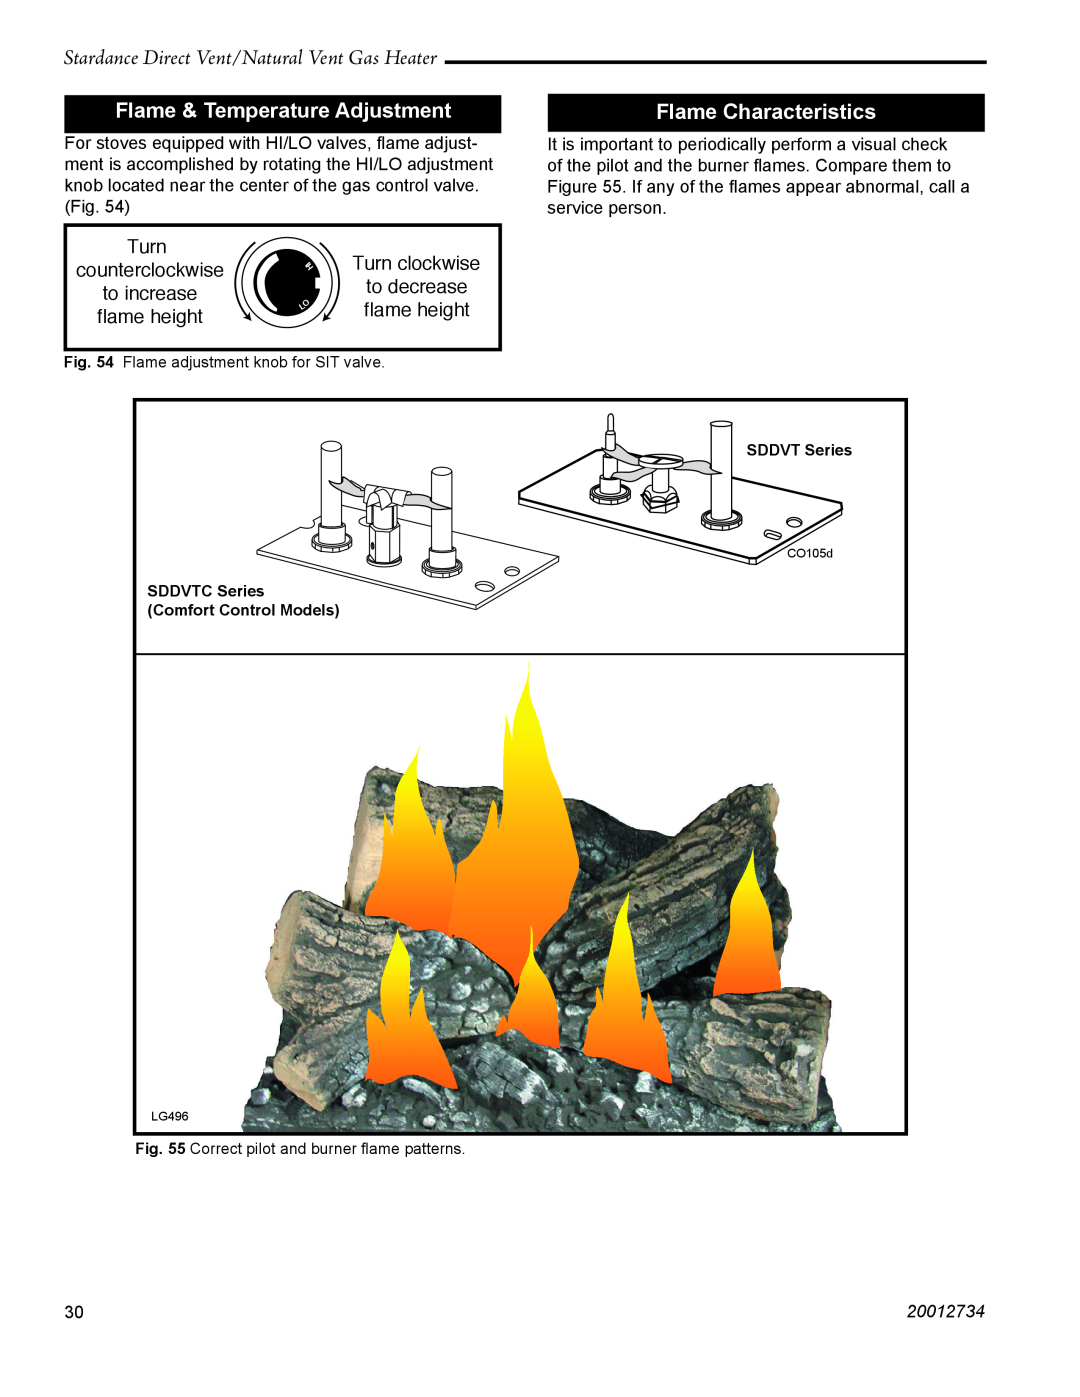 Vermont Casting SDDVTCVG Flame & Temperature Adjustment, Flame Characteristics, Turn clockwise to decrease flame height 